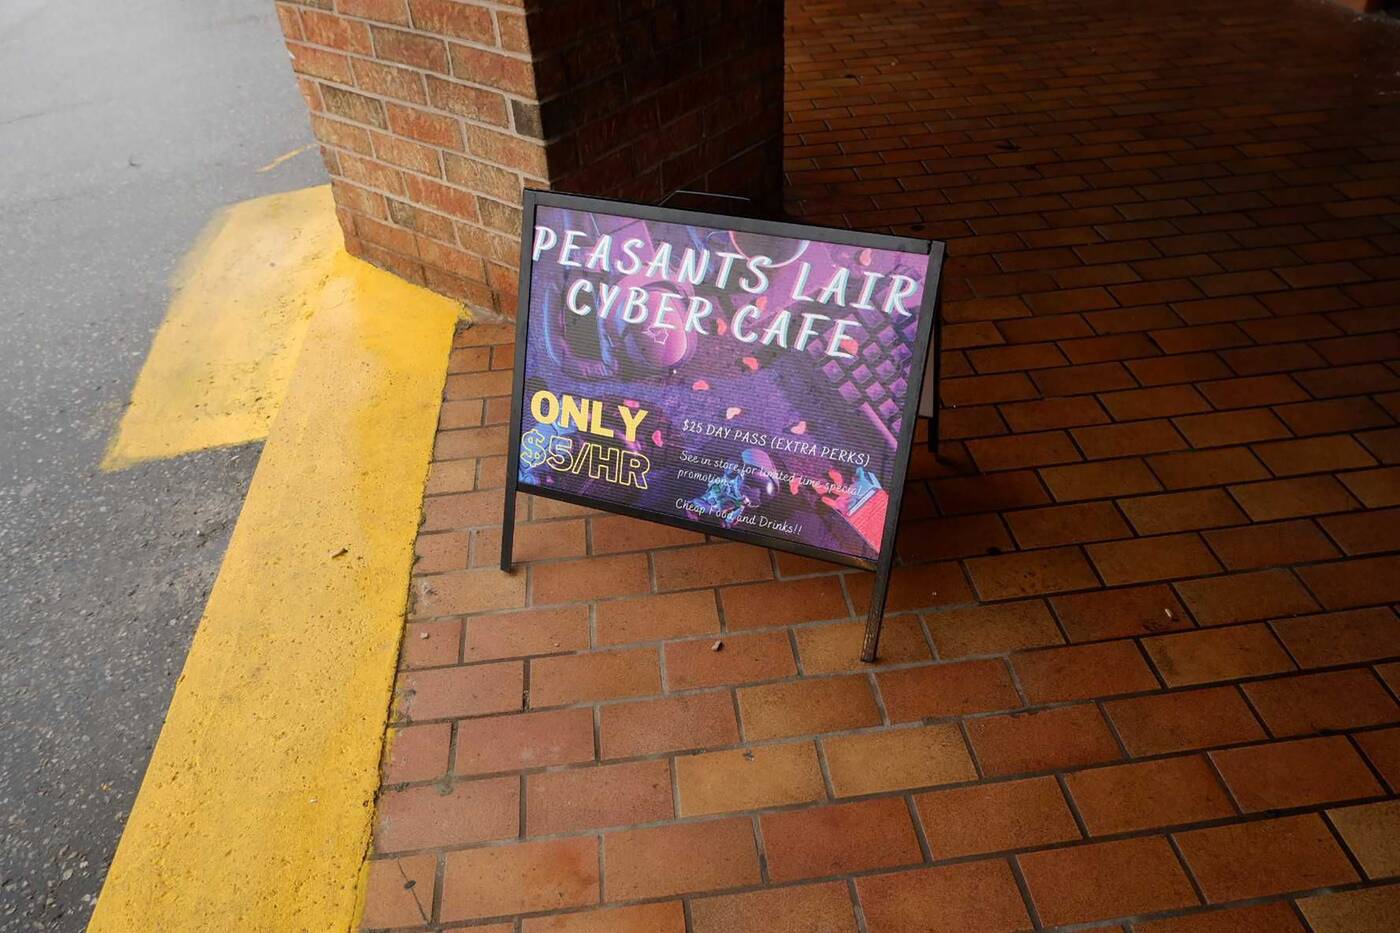 Peasants Lair Cyber Cafe